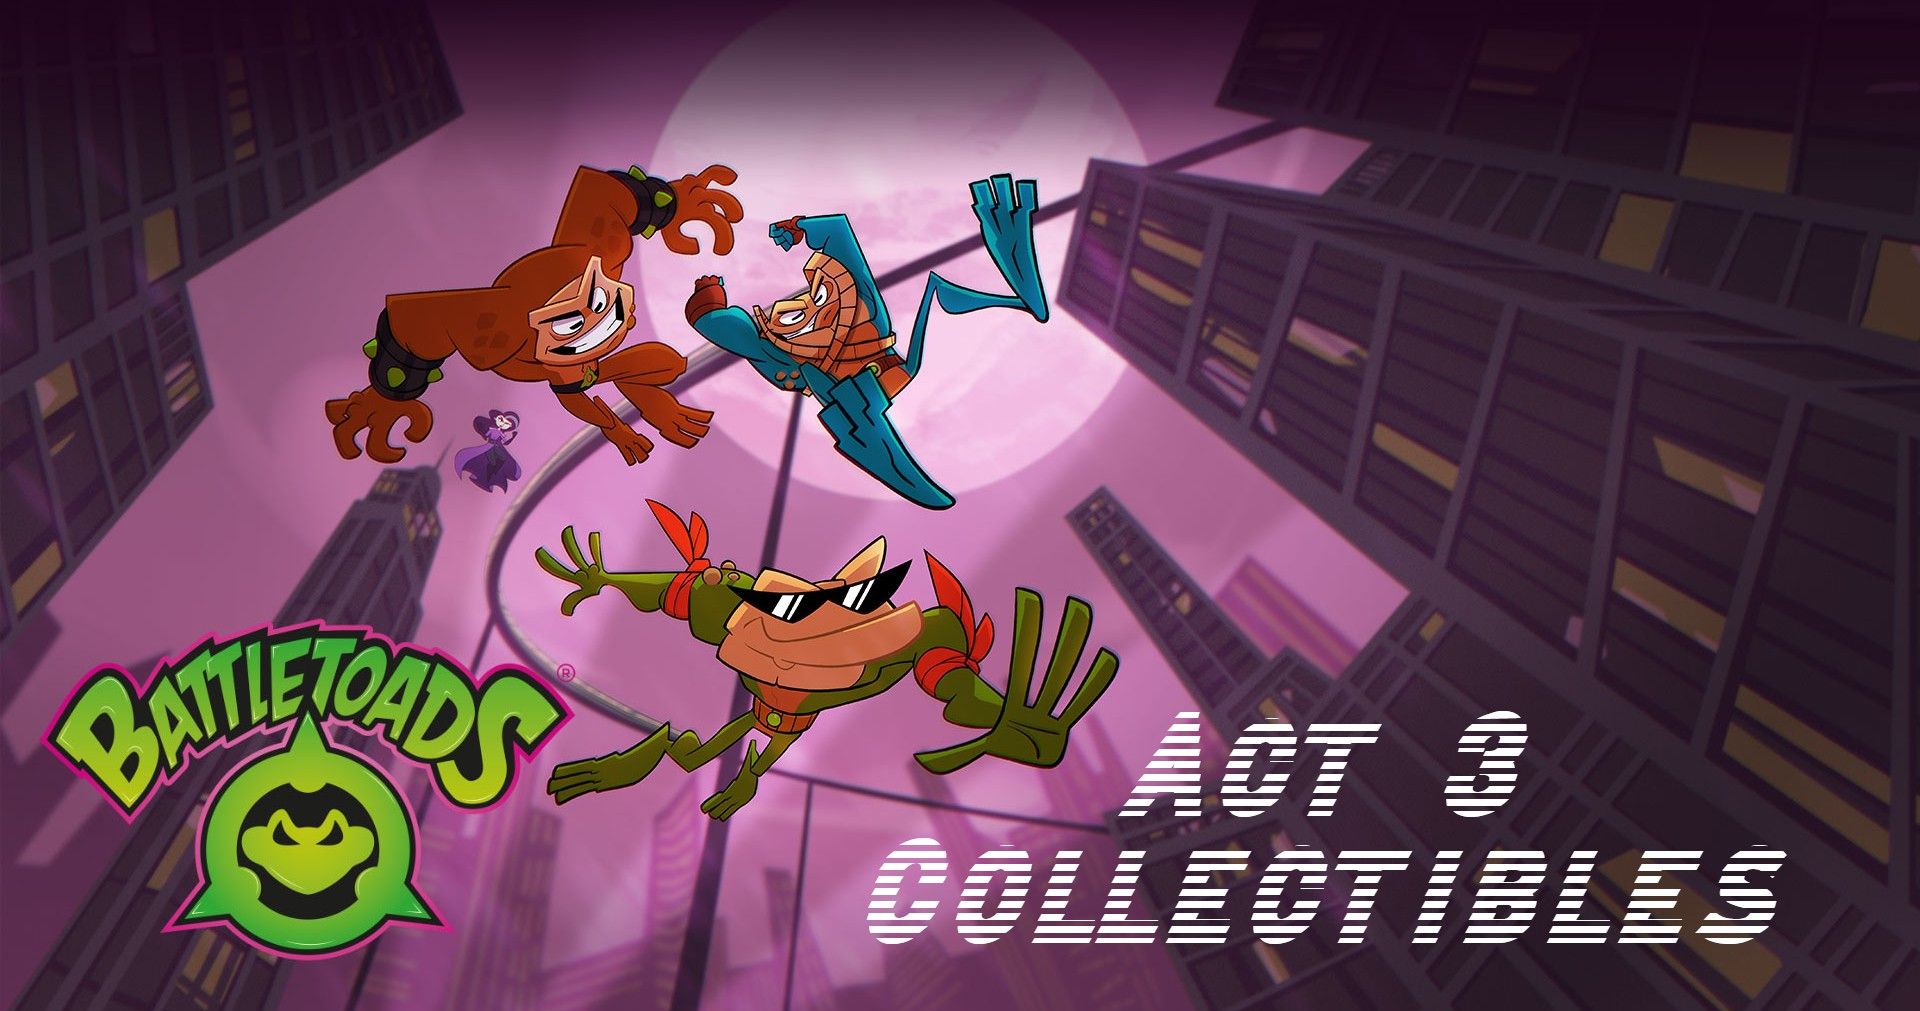 Battletoads Act 3 Collectibles